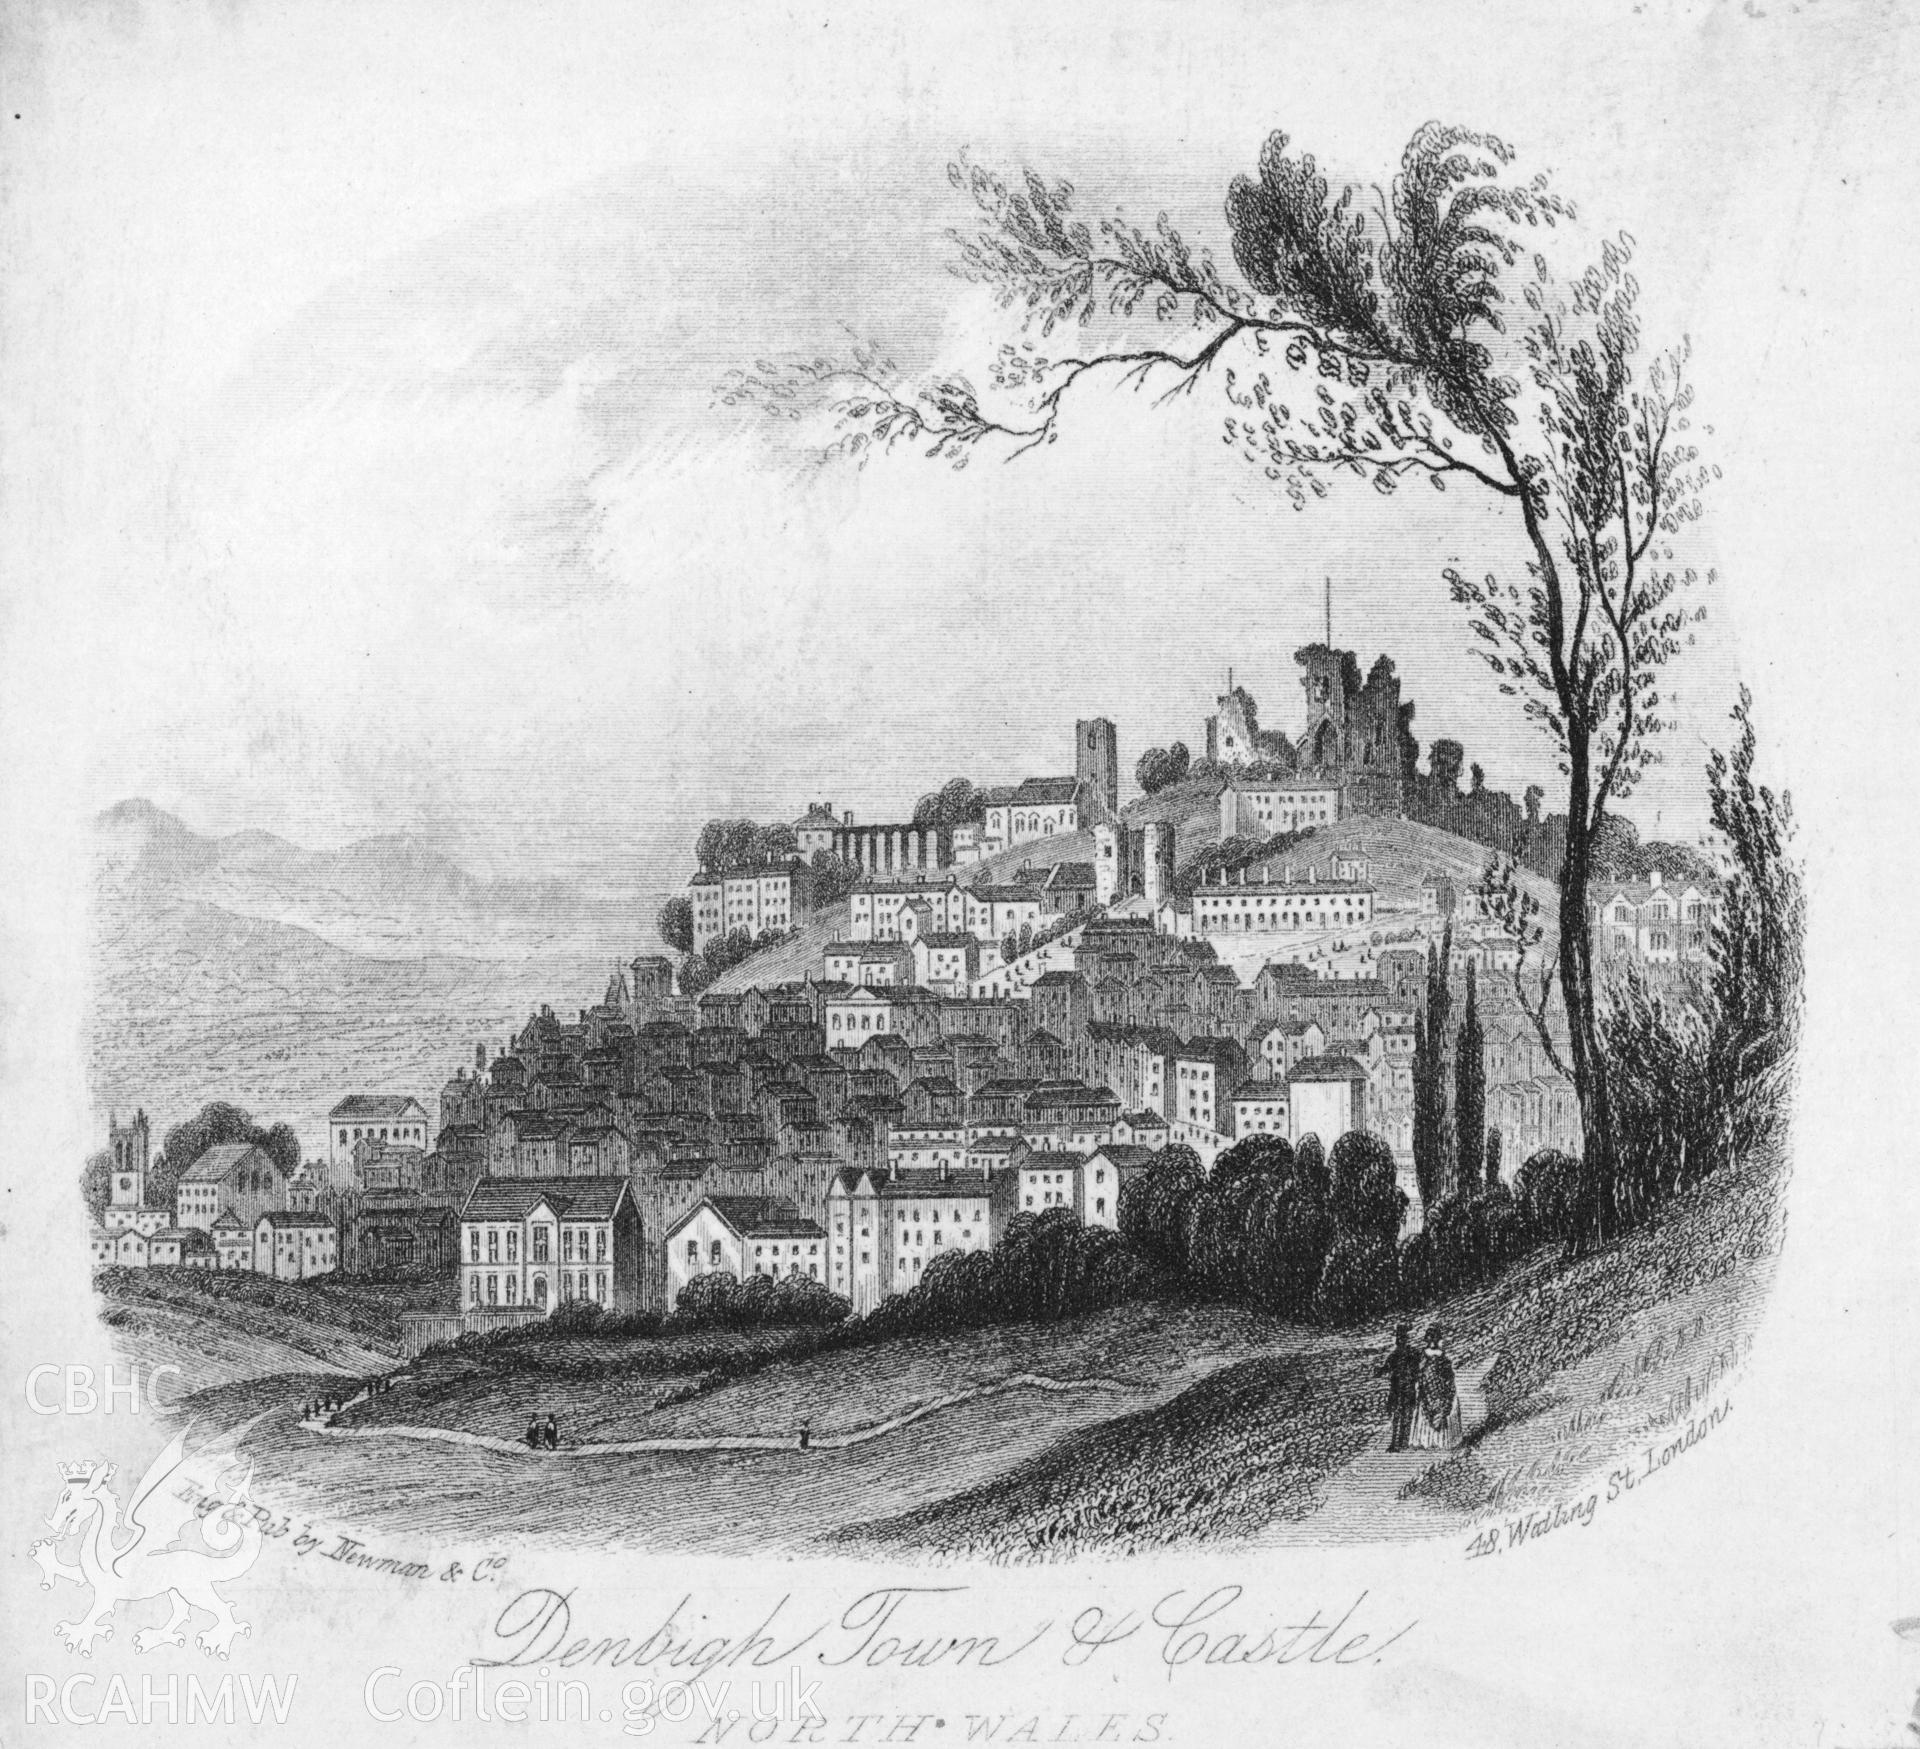 Black and white postcard showing an engraving of Denbigh Town and castle.